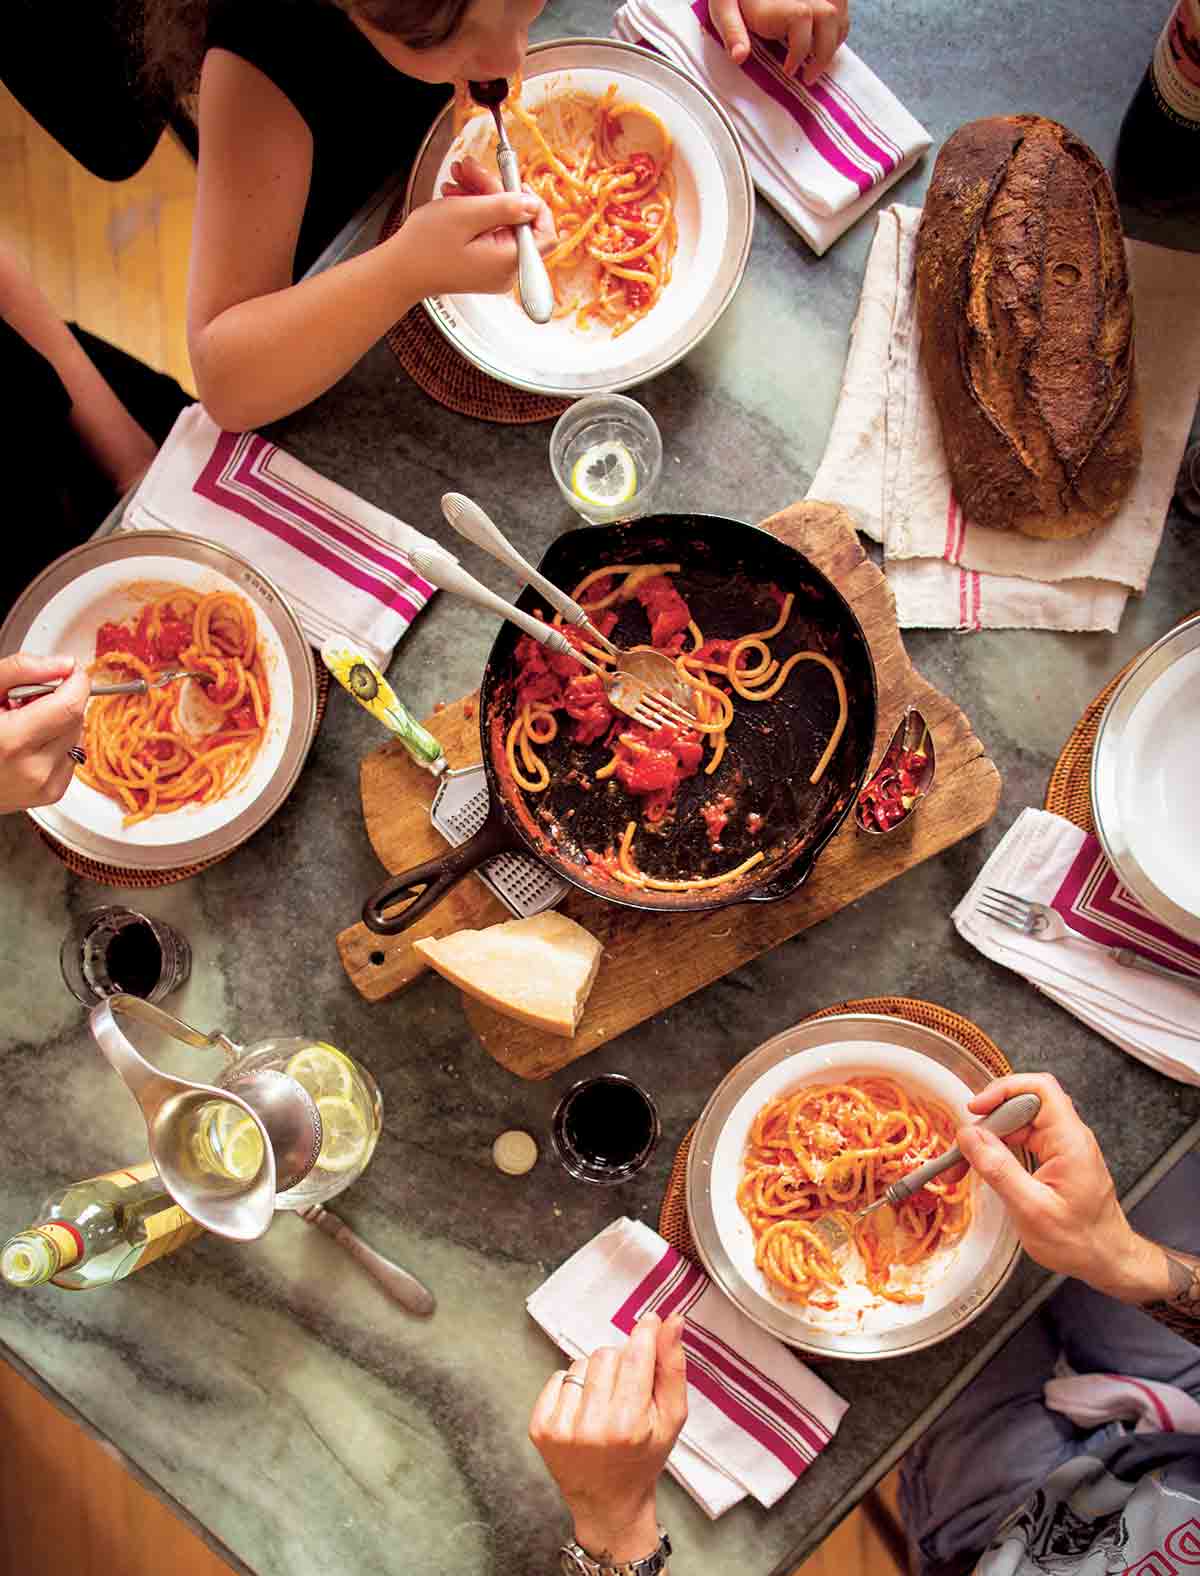 People gathered around a cast-iron skillet on a wooden board with spaghetti and red sauce.